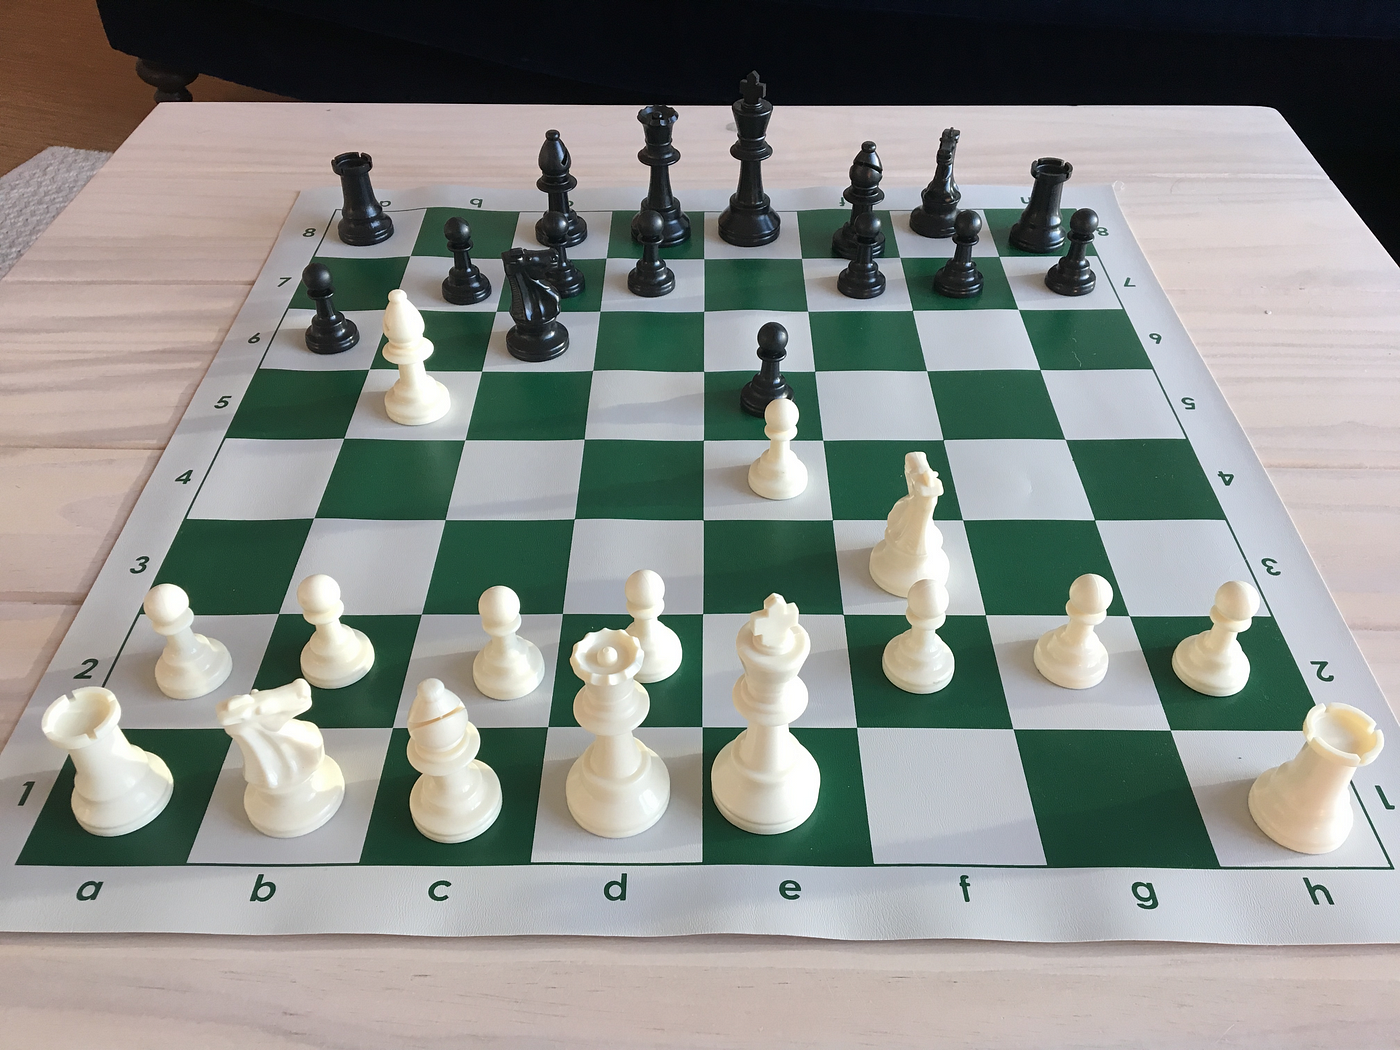 My month-long quest to become a chess master from scratch, by Max Deutsch